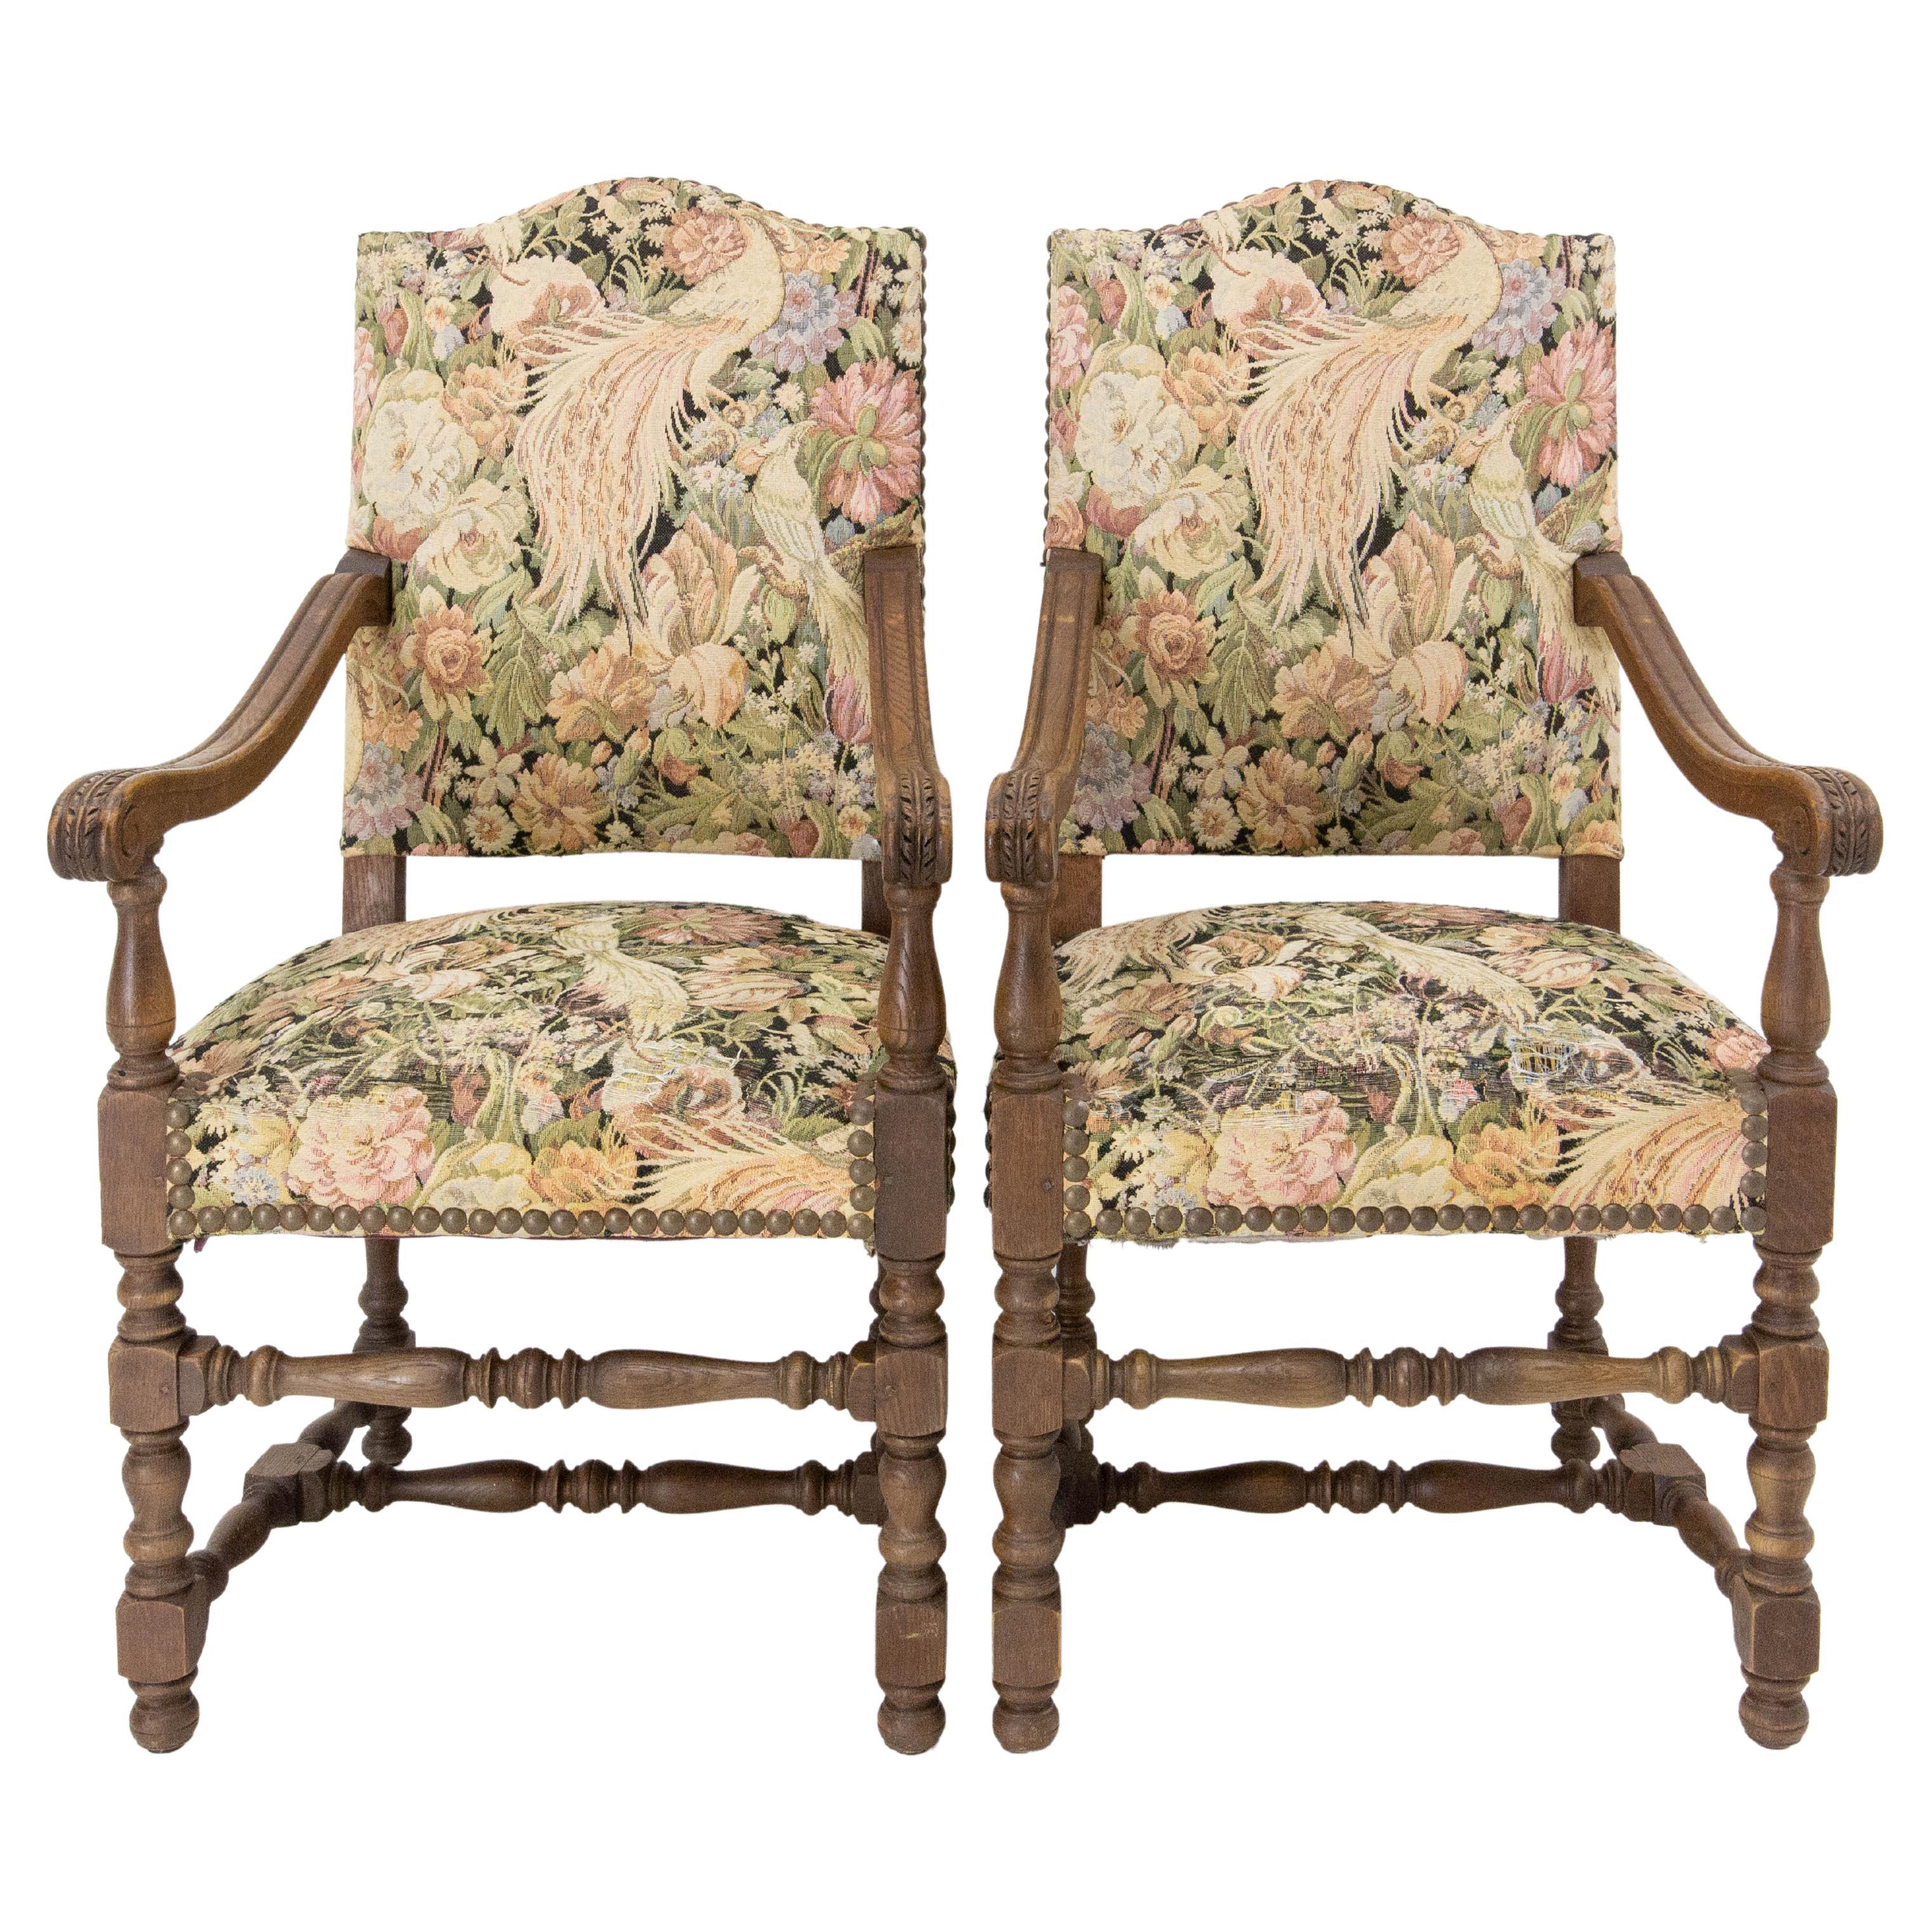 Pair of Louis XIV Revival Armchairs French, Late 19th Century to Recover For Sale